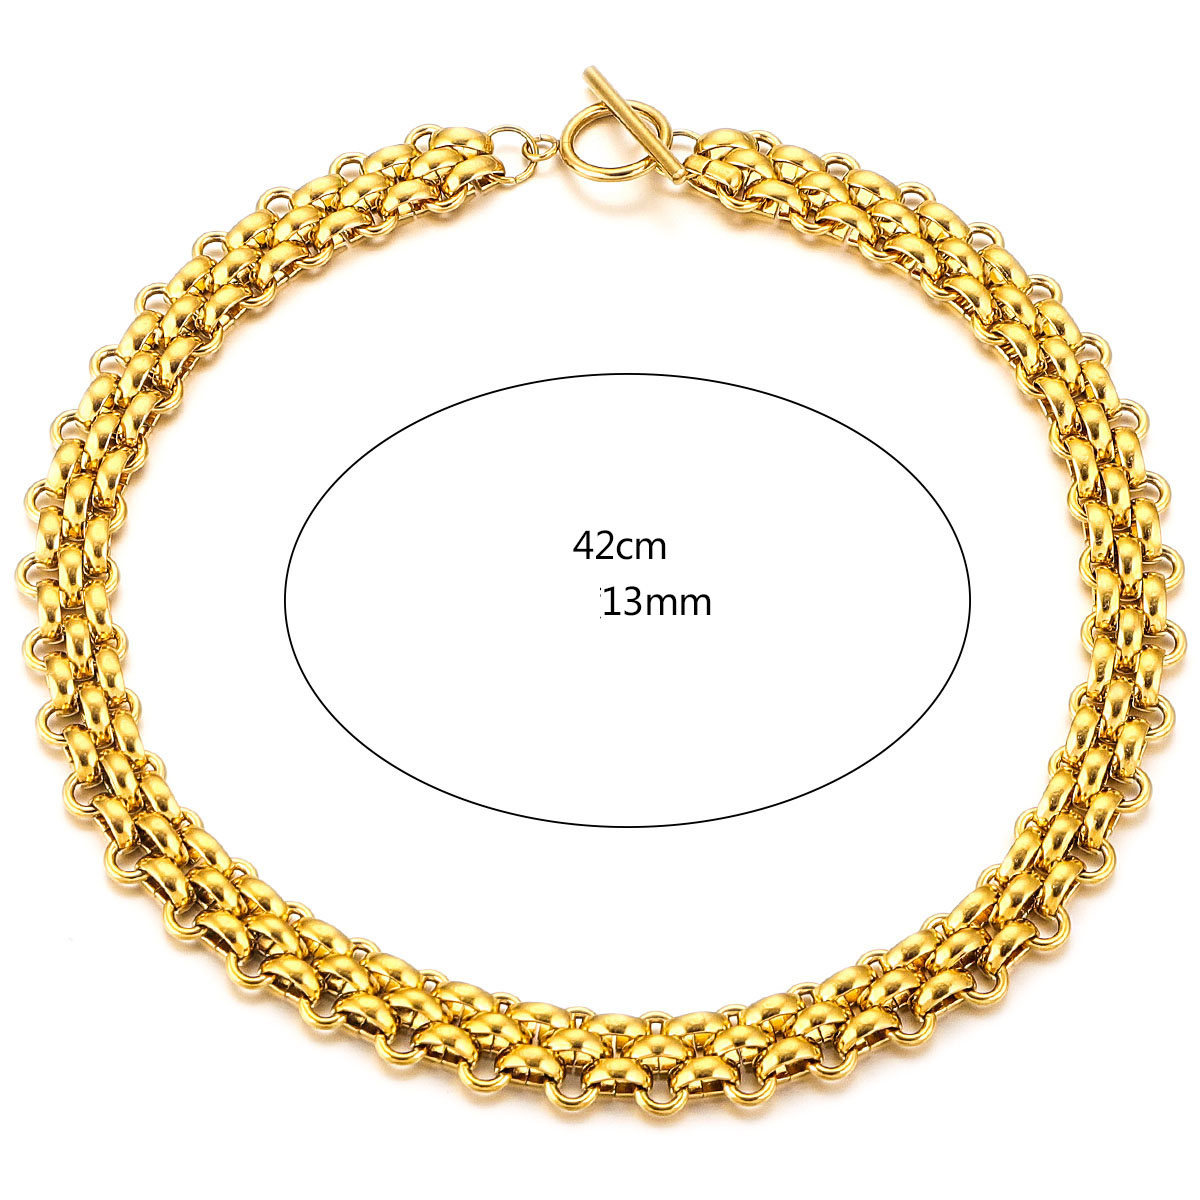 7:Glossy Necklace - Gold